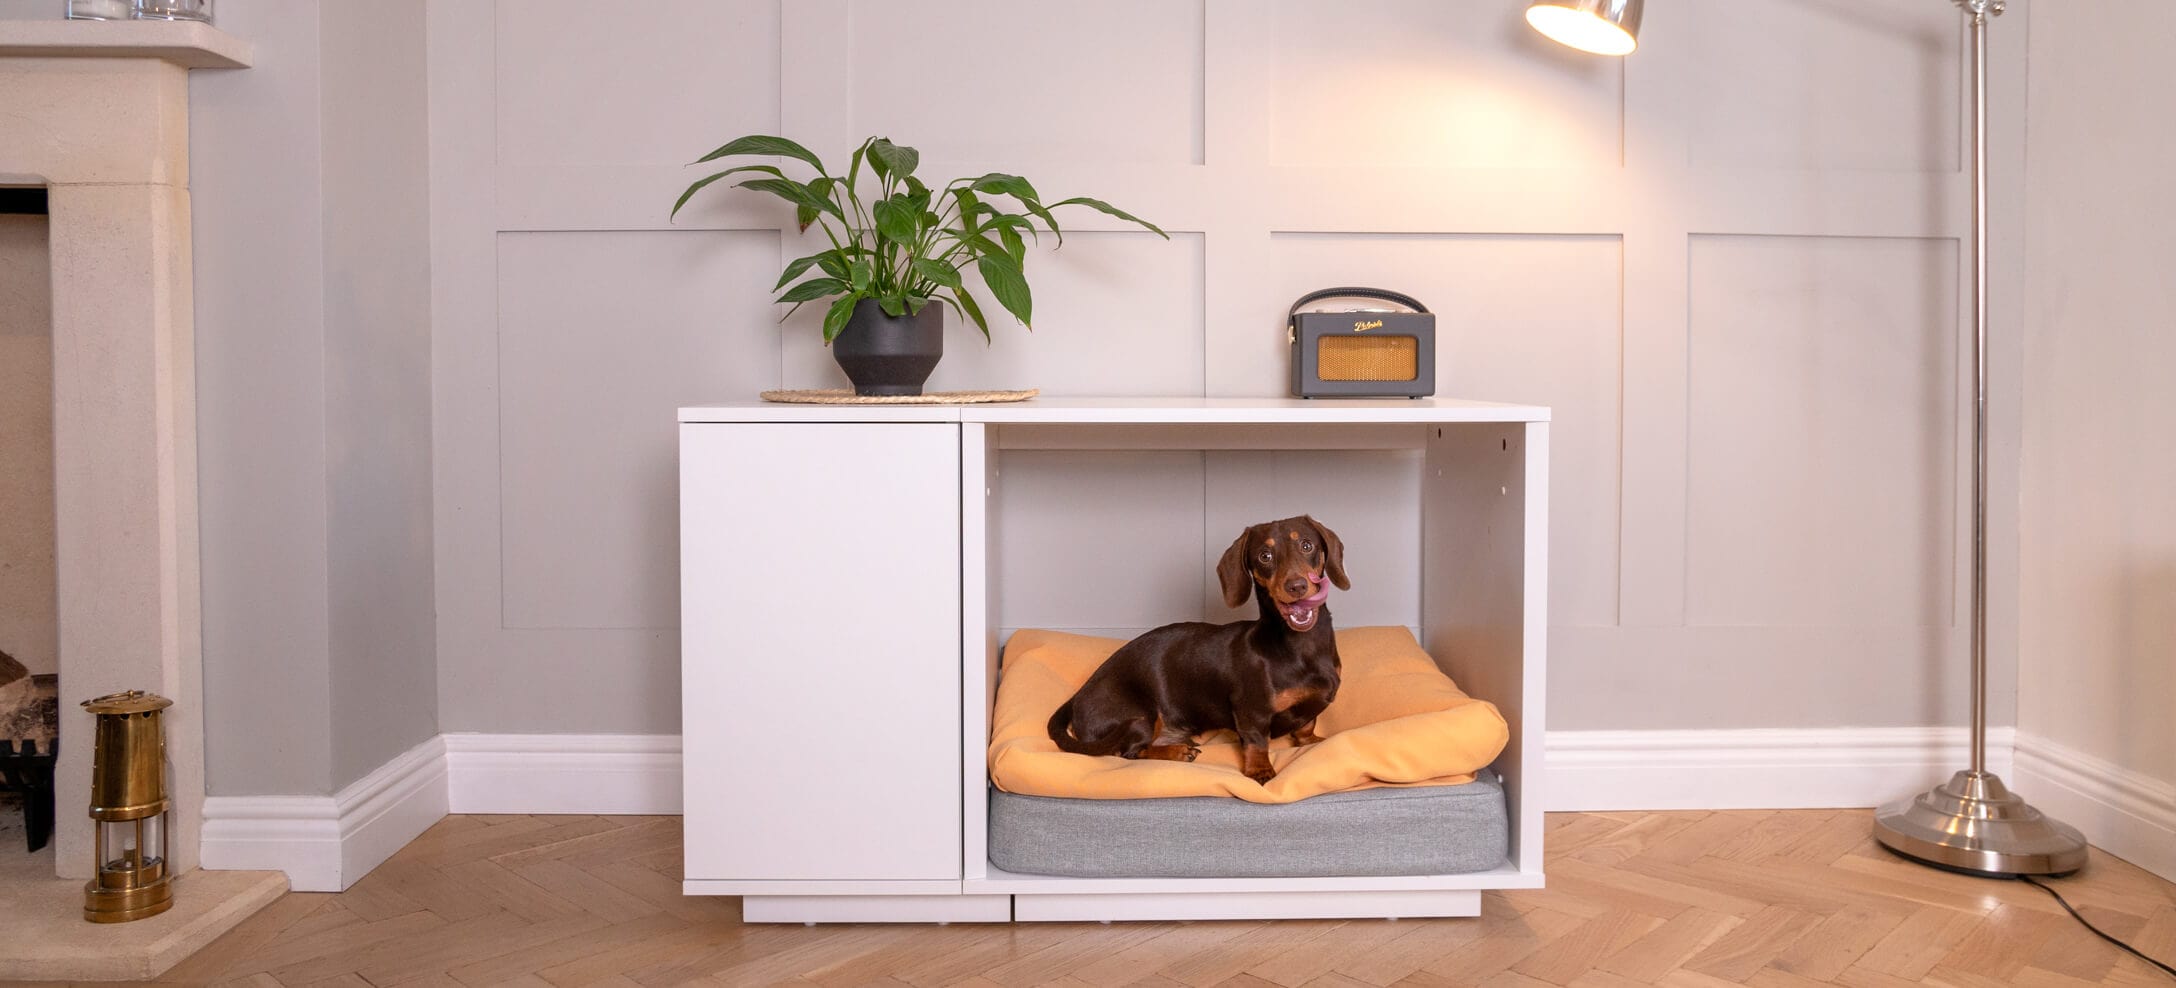 Dachshund in Omlet's Fido Nook dog crate with tongue out